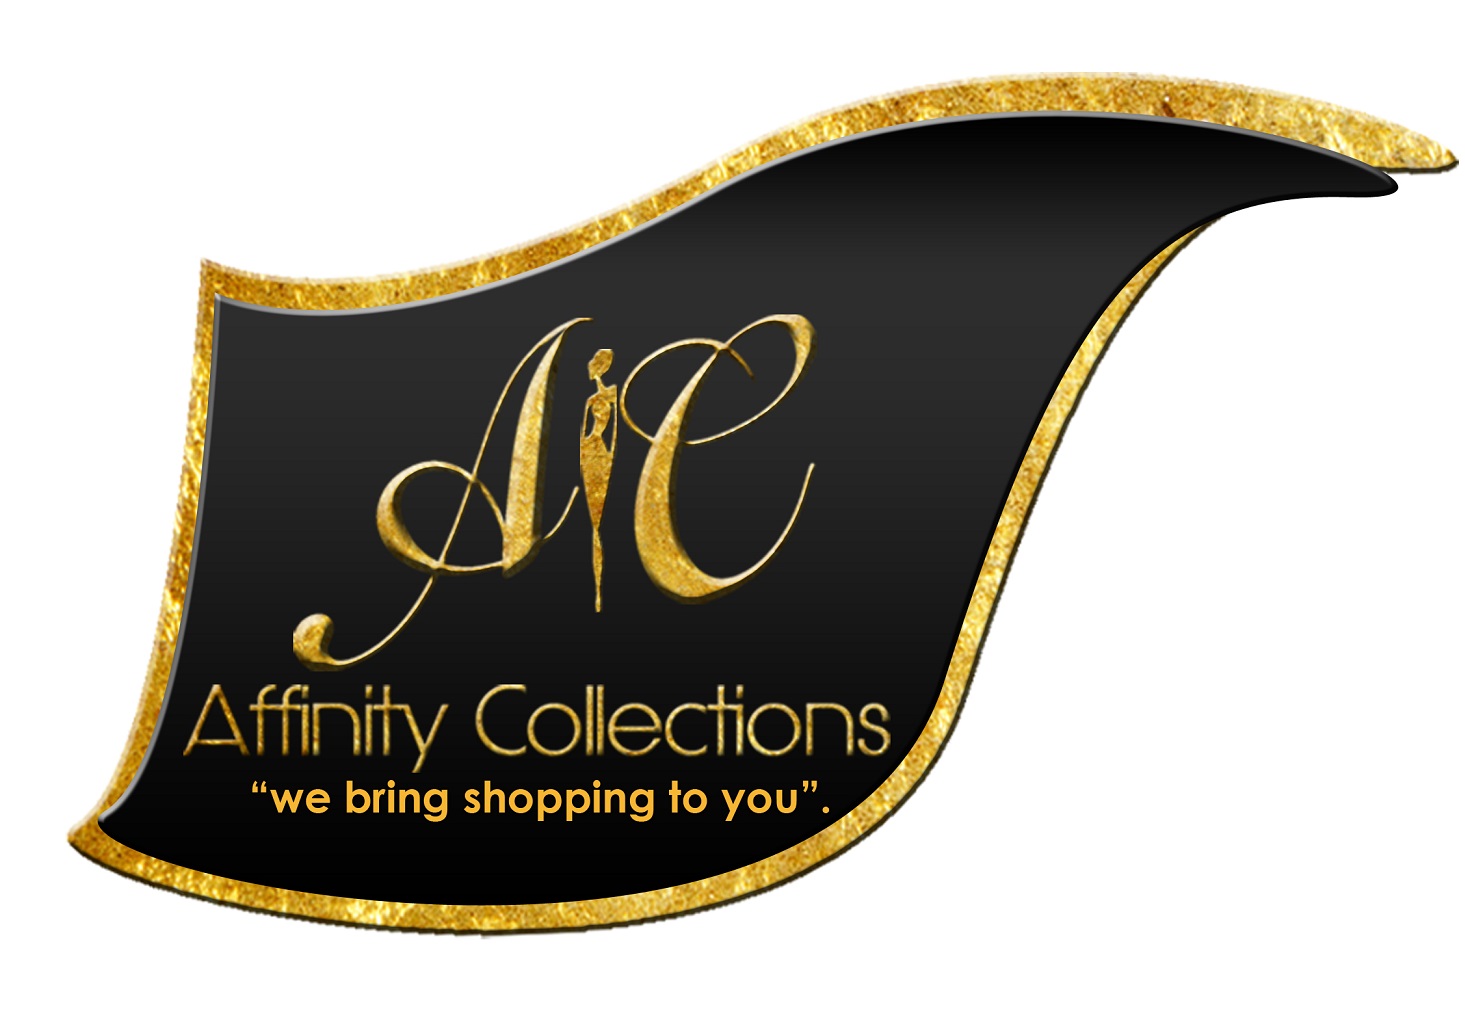 Affinity Collections